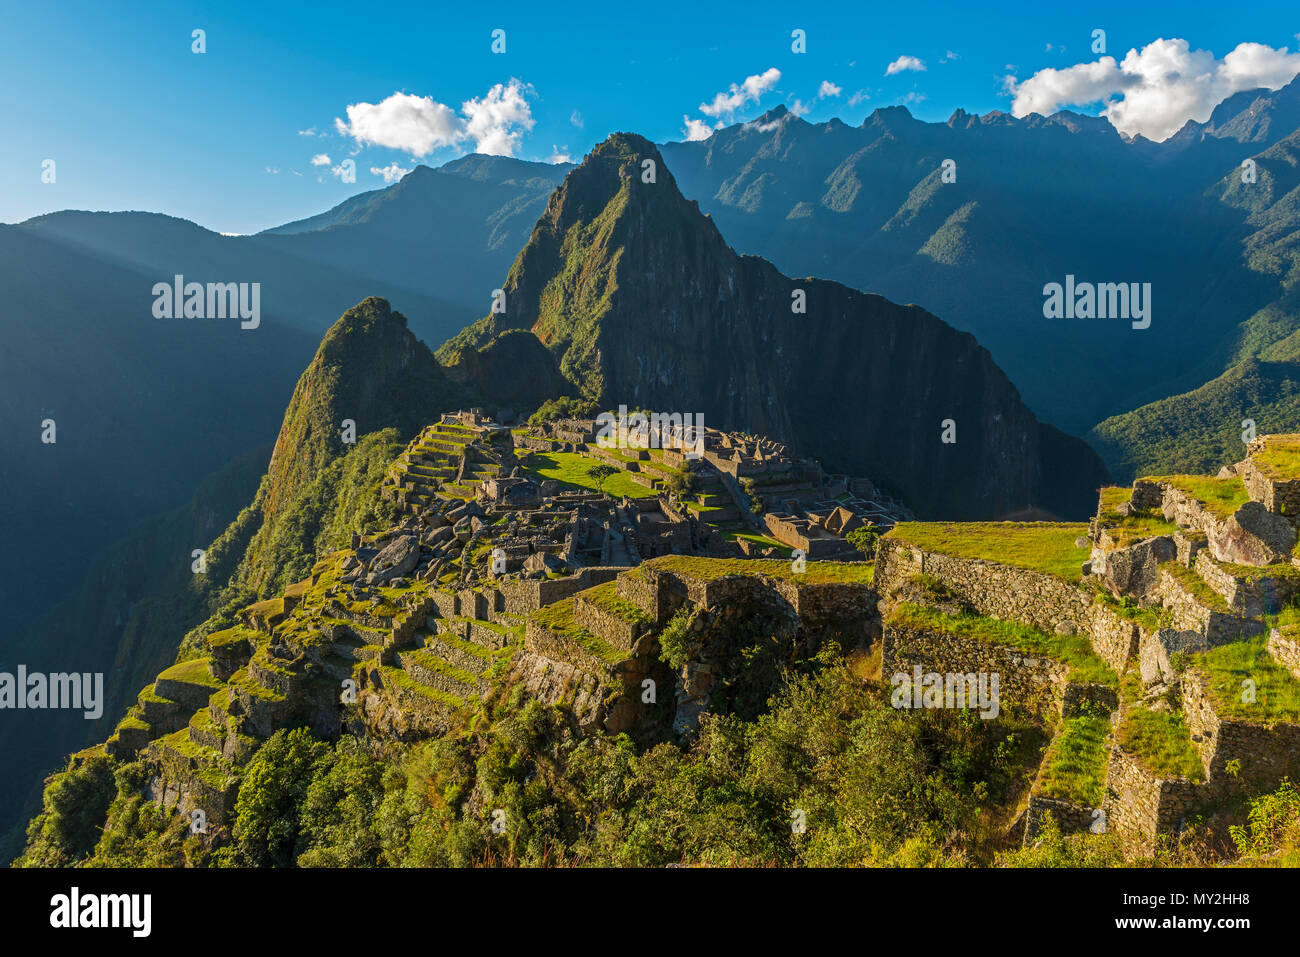 Wide angle landscape of the famous Inca ruins of Machu Picchu at sunset in the sacred Urubamba valley near the city of Cusco, Peru, South America. Stock Photo